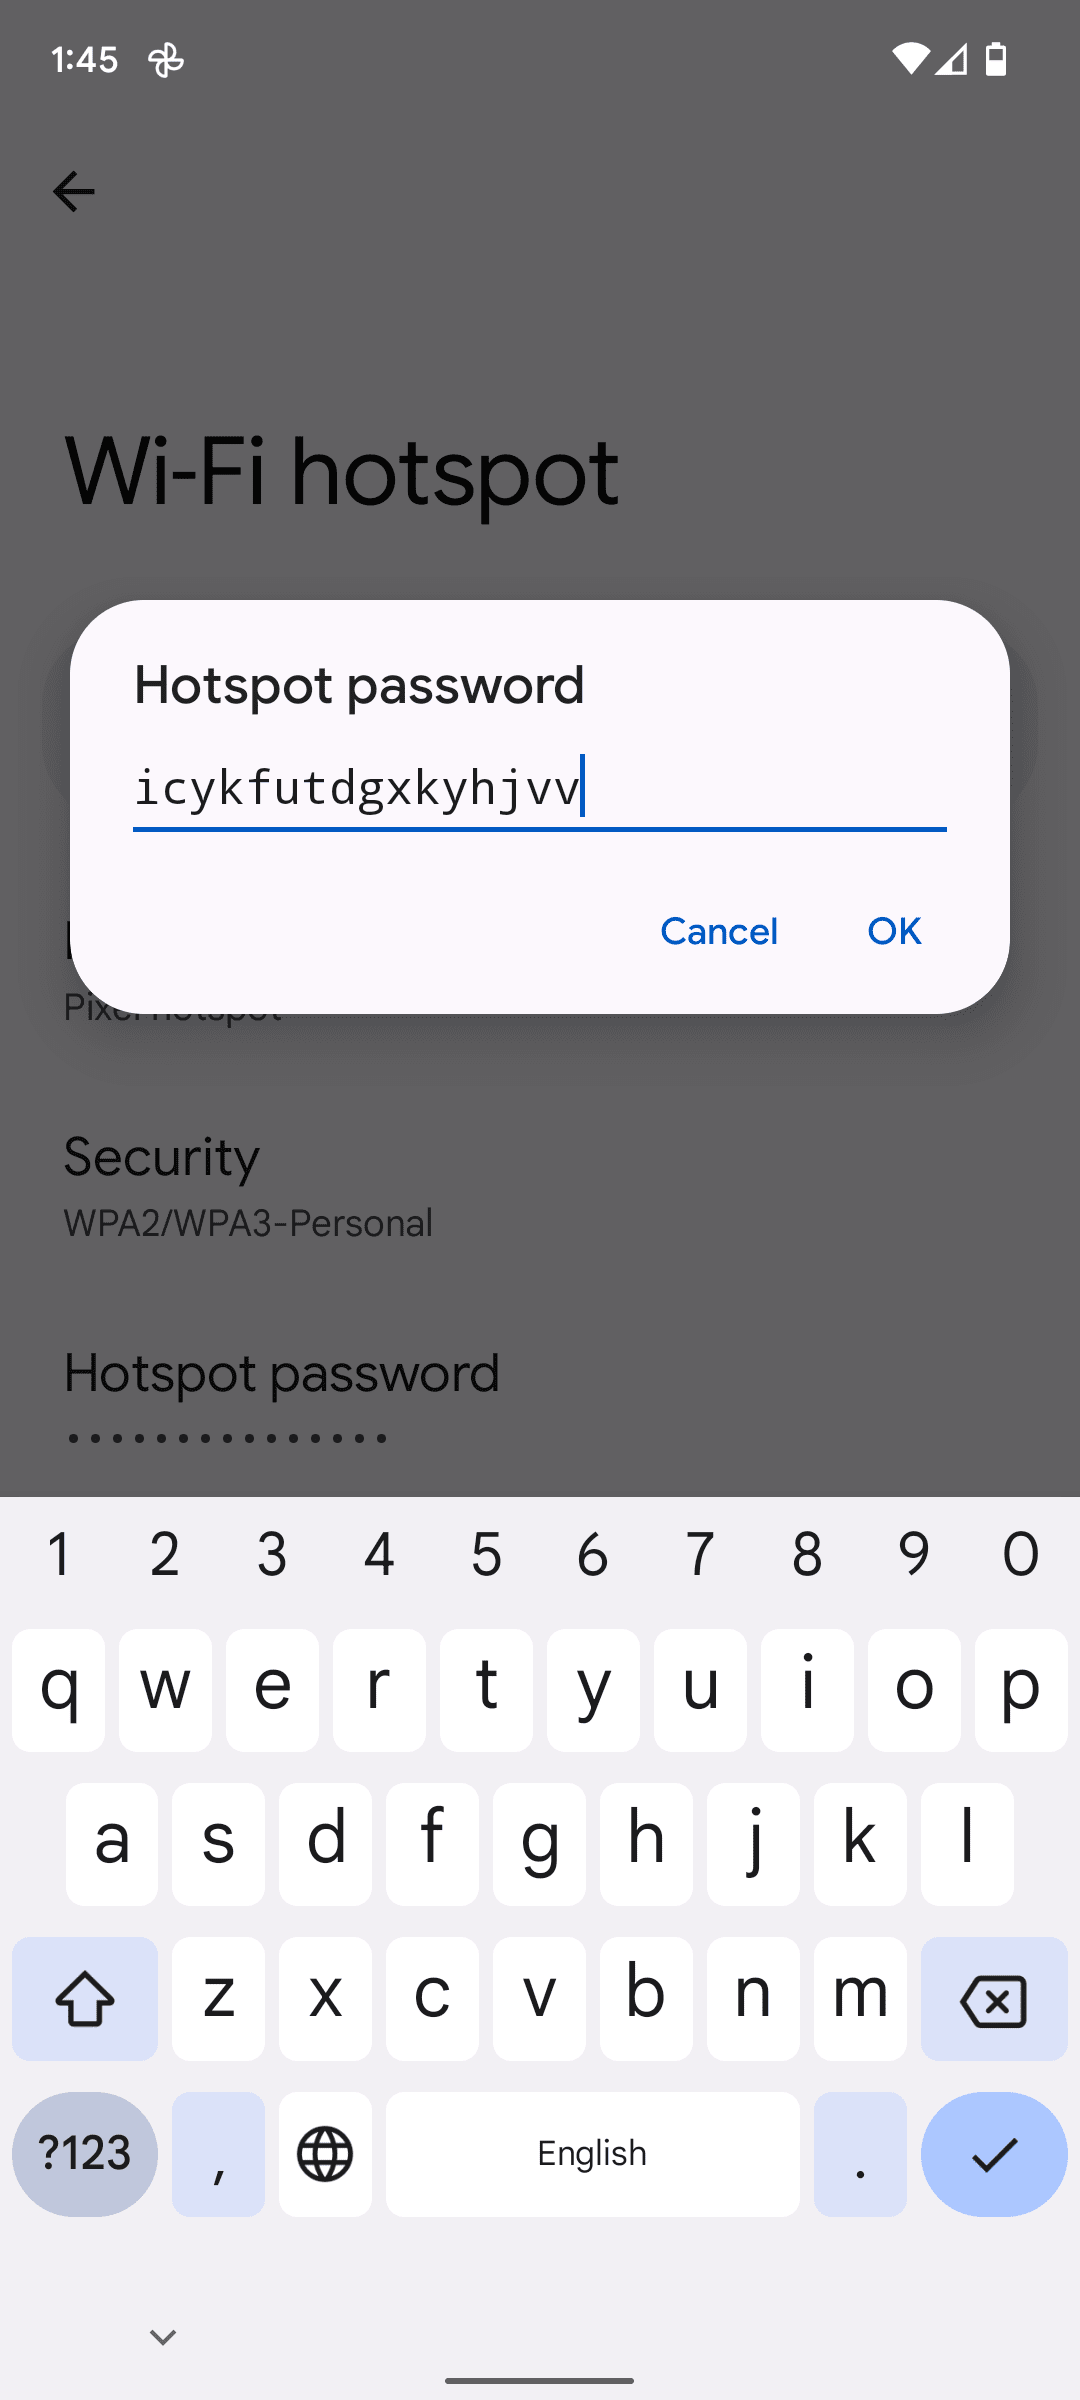 To change the hotspot password, delete the existing password and enter a new one.